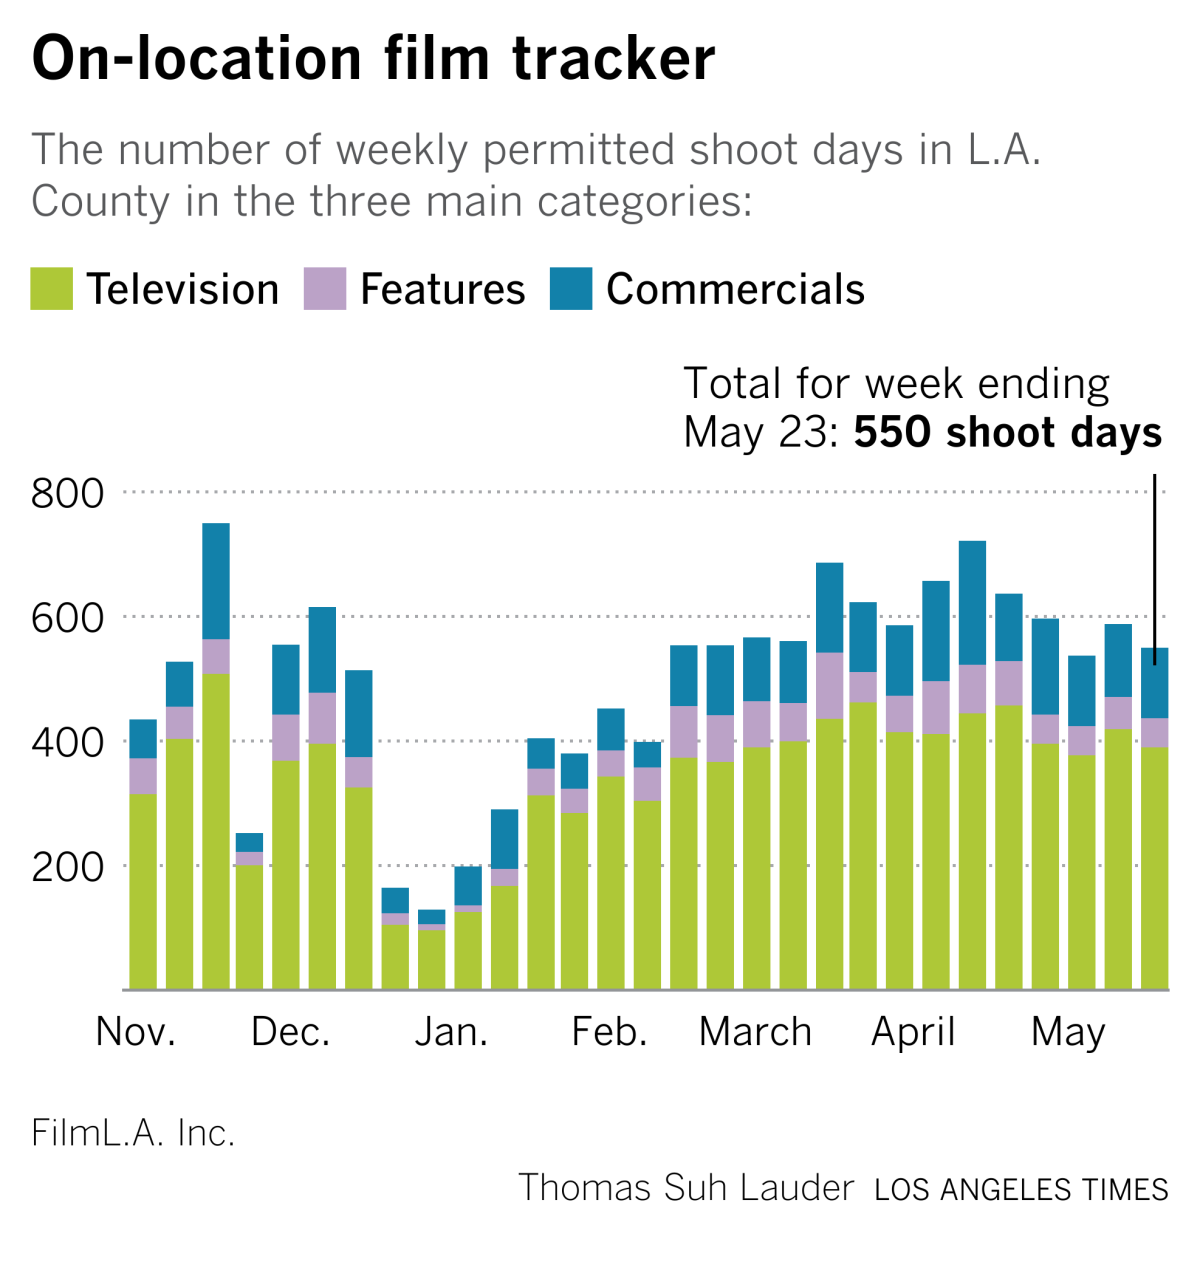 On-location film tracker: 550 permitted shoot days for TV, features and commercials in L.A. County for the week ending May 23